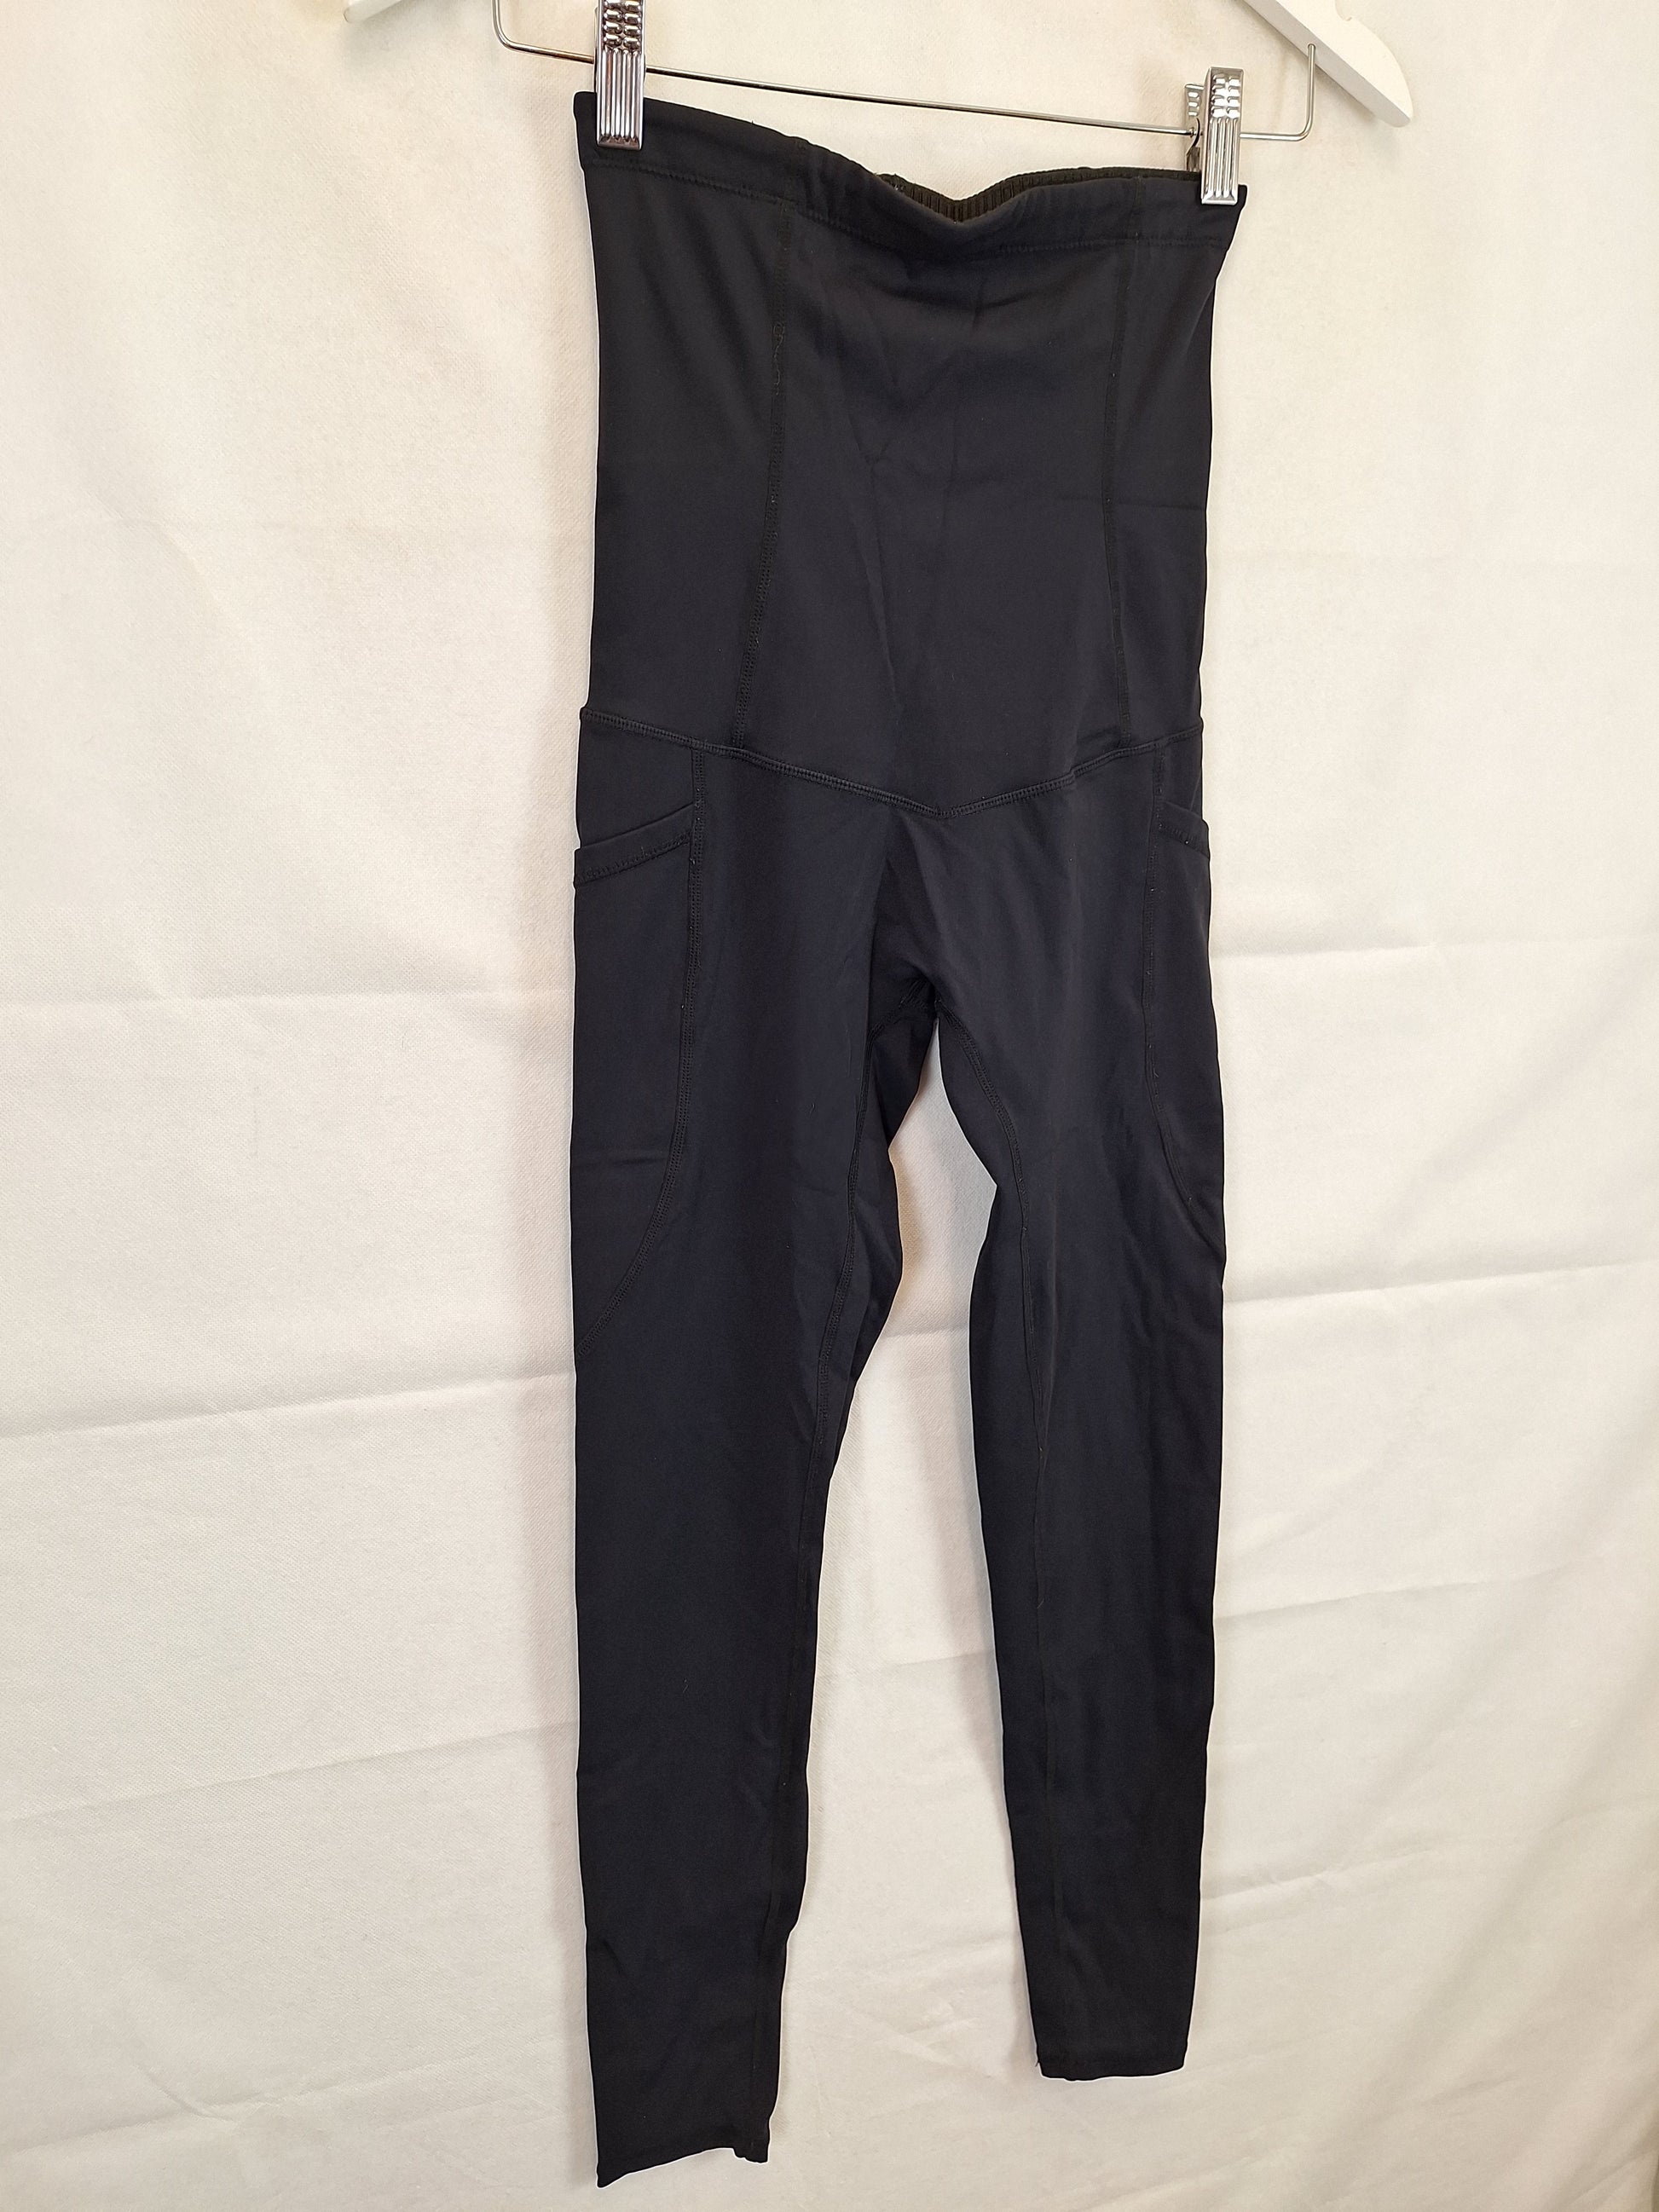 Emamaco Active Maternity Tights Leggings Size S by SwapUp-Online Second Hand Store-Online Thrift Store